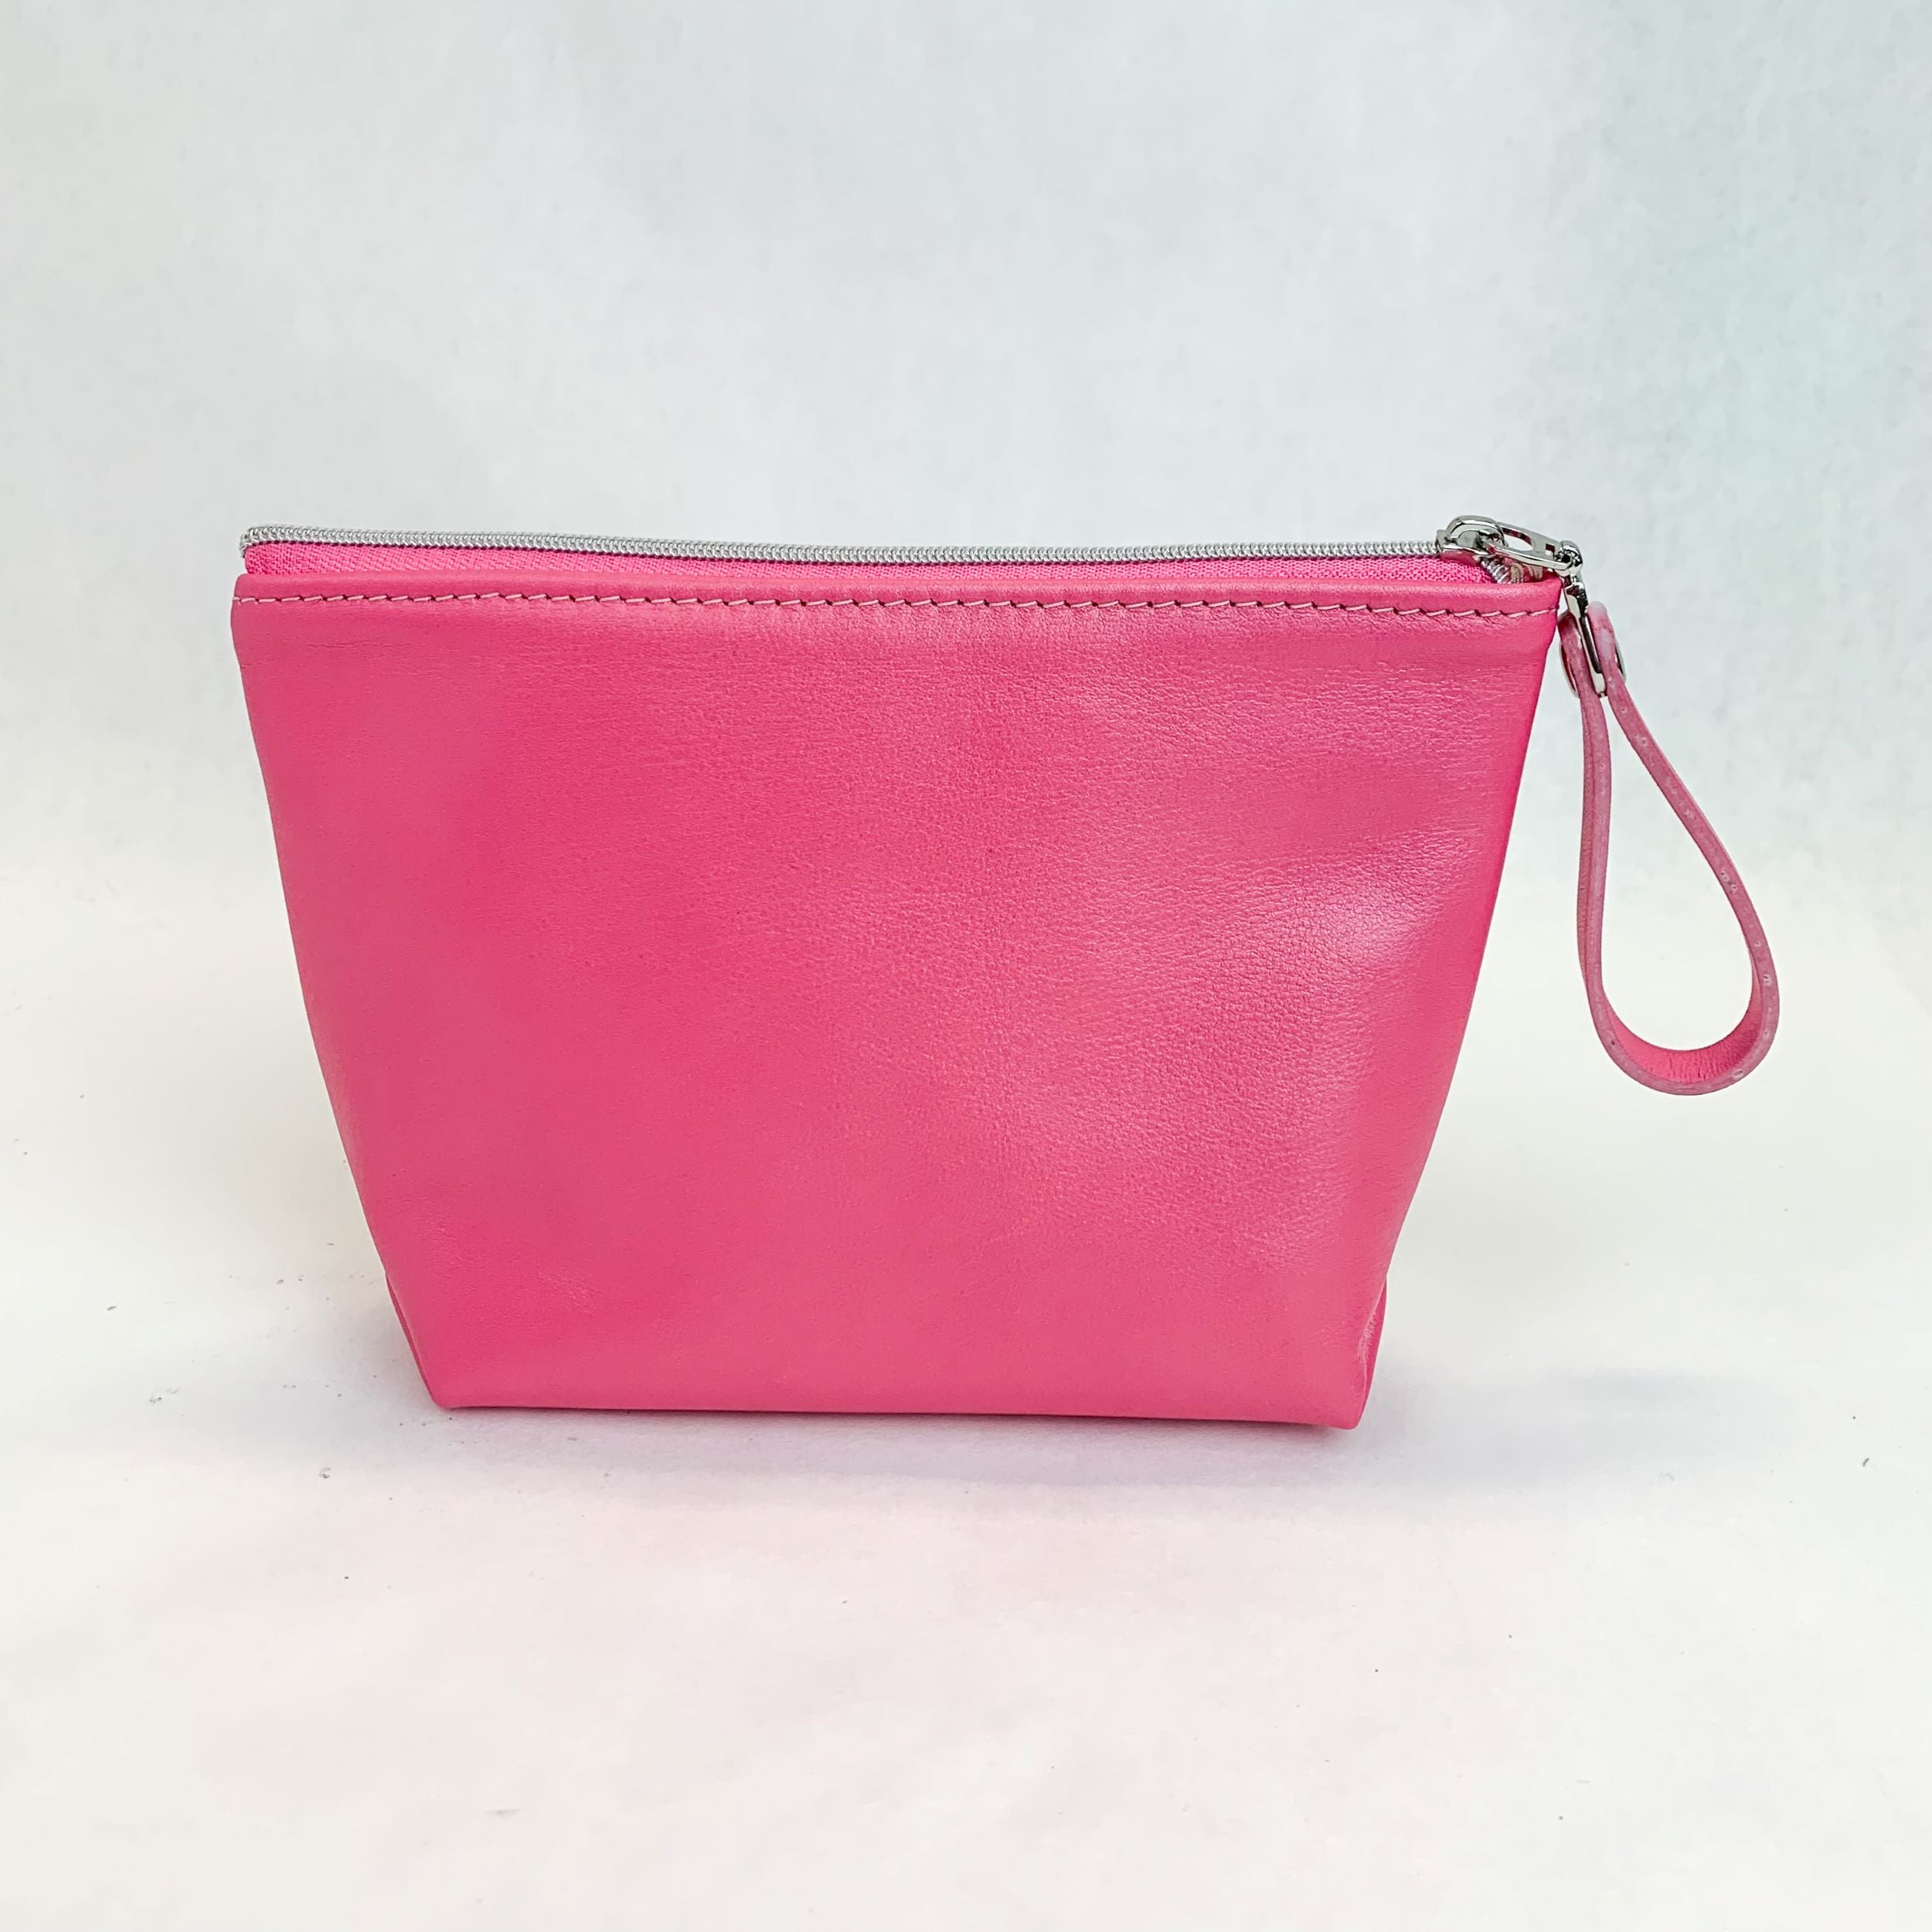 Back view T5 Cosmetics case toiletry bag designer handcrafted in smooth calf leather in frosted pink.